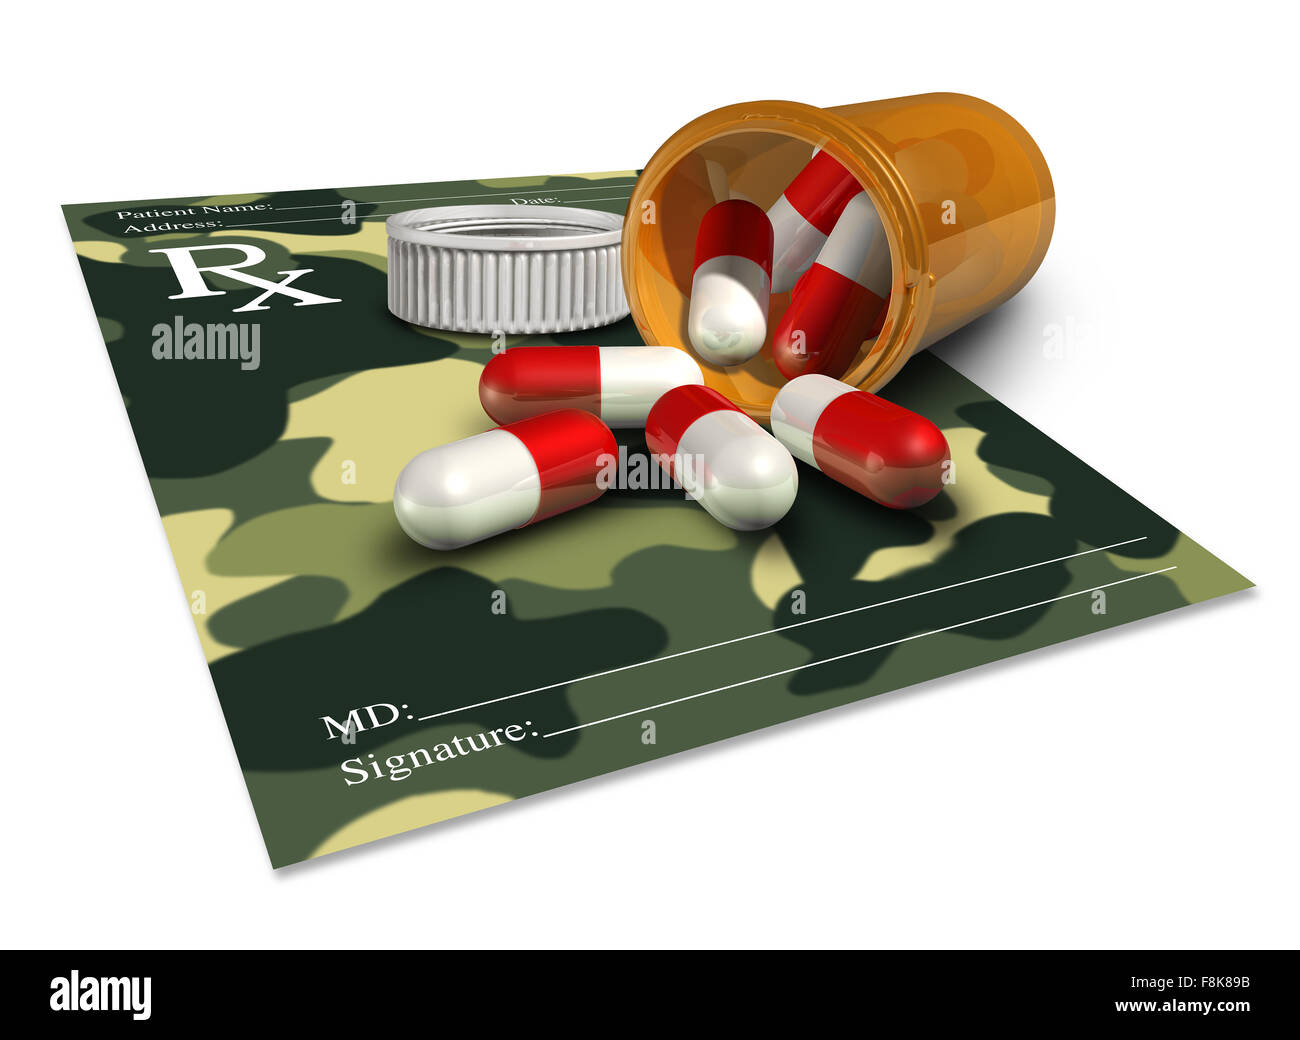 Military medicine concept as a doctor prescription with a camouflage pattern for veteran soldier therapy or an icon for pharmaceuticals in the armed forces. Stock Photo